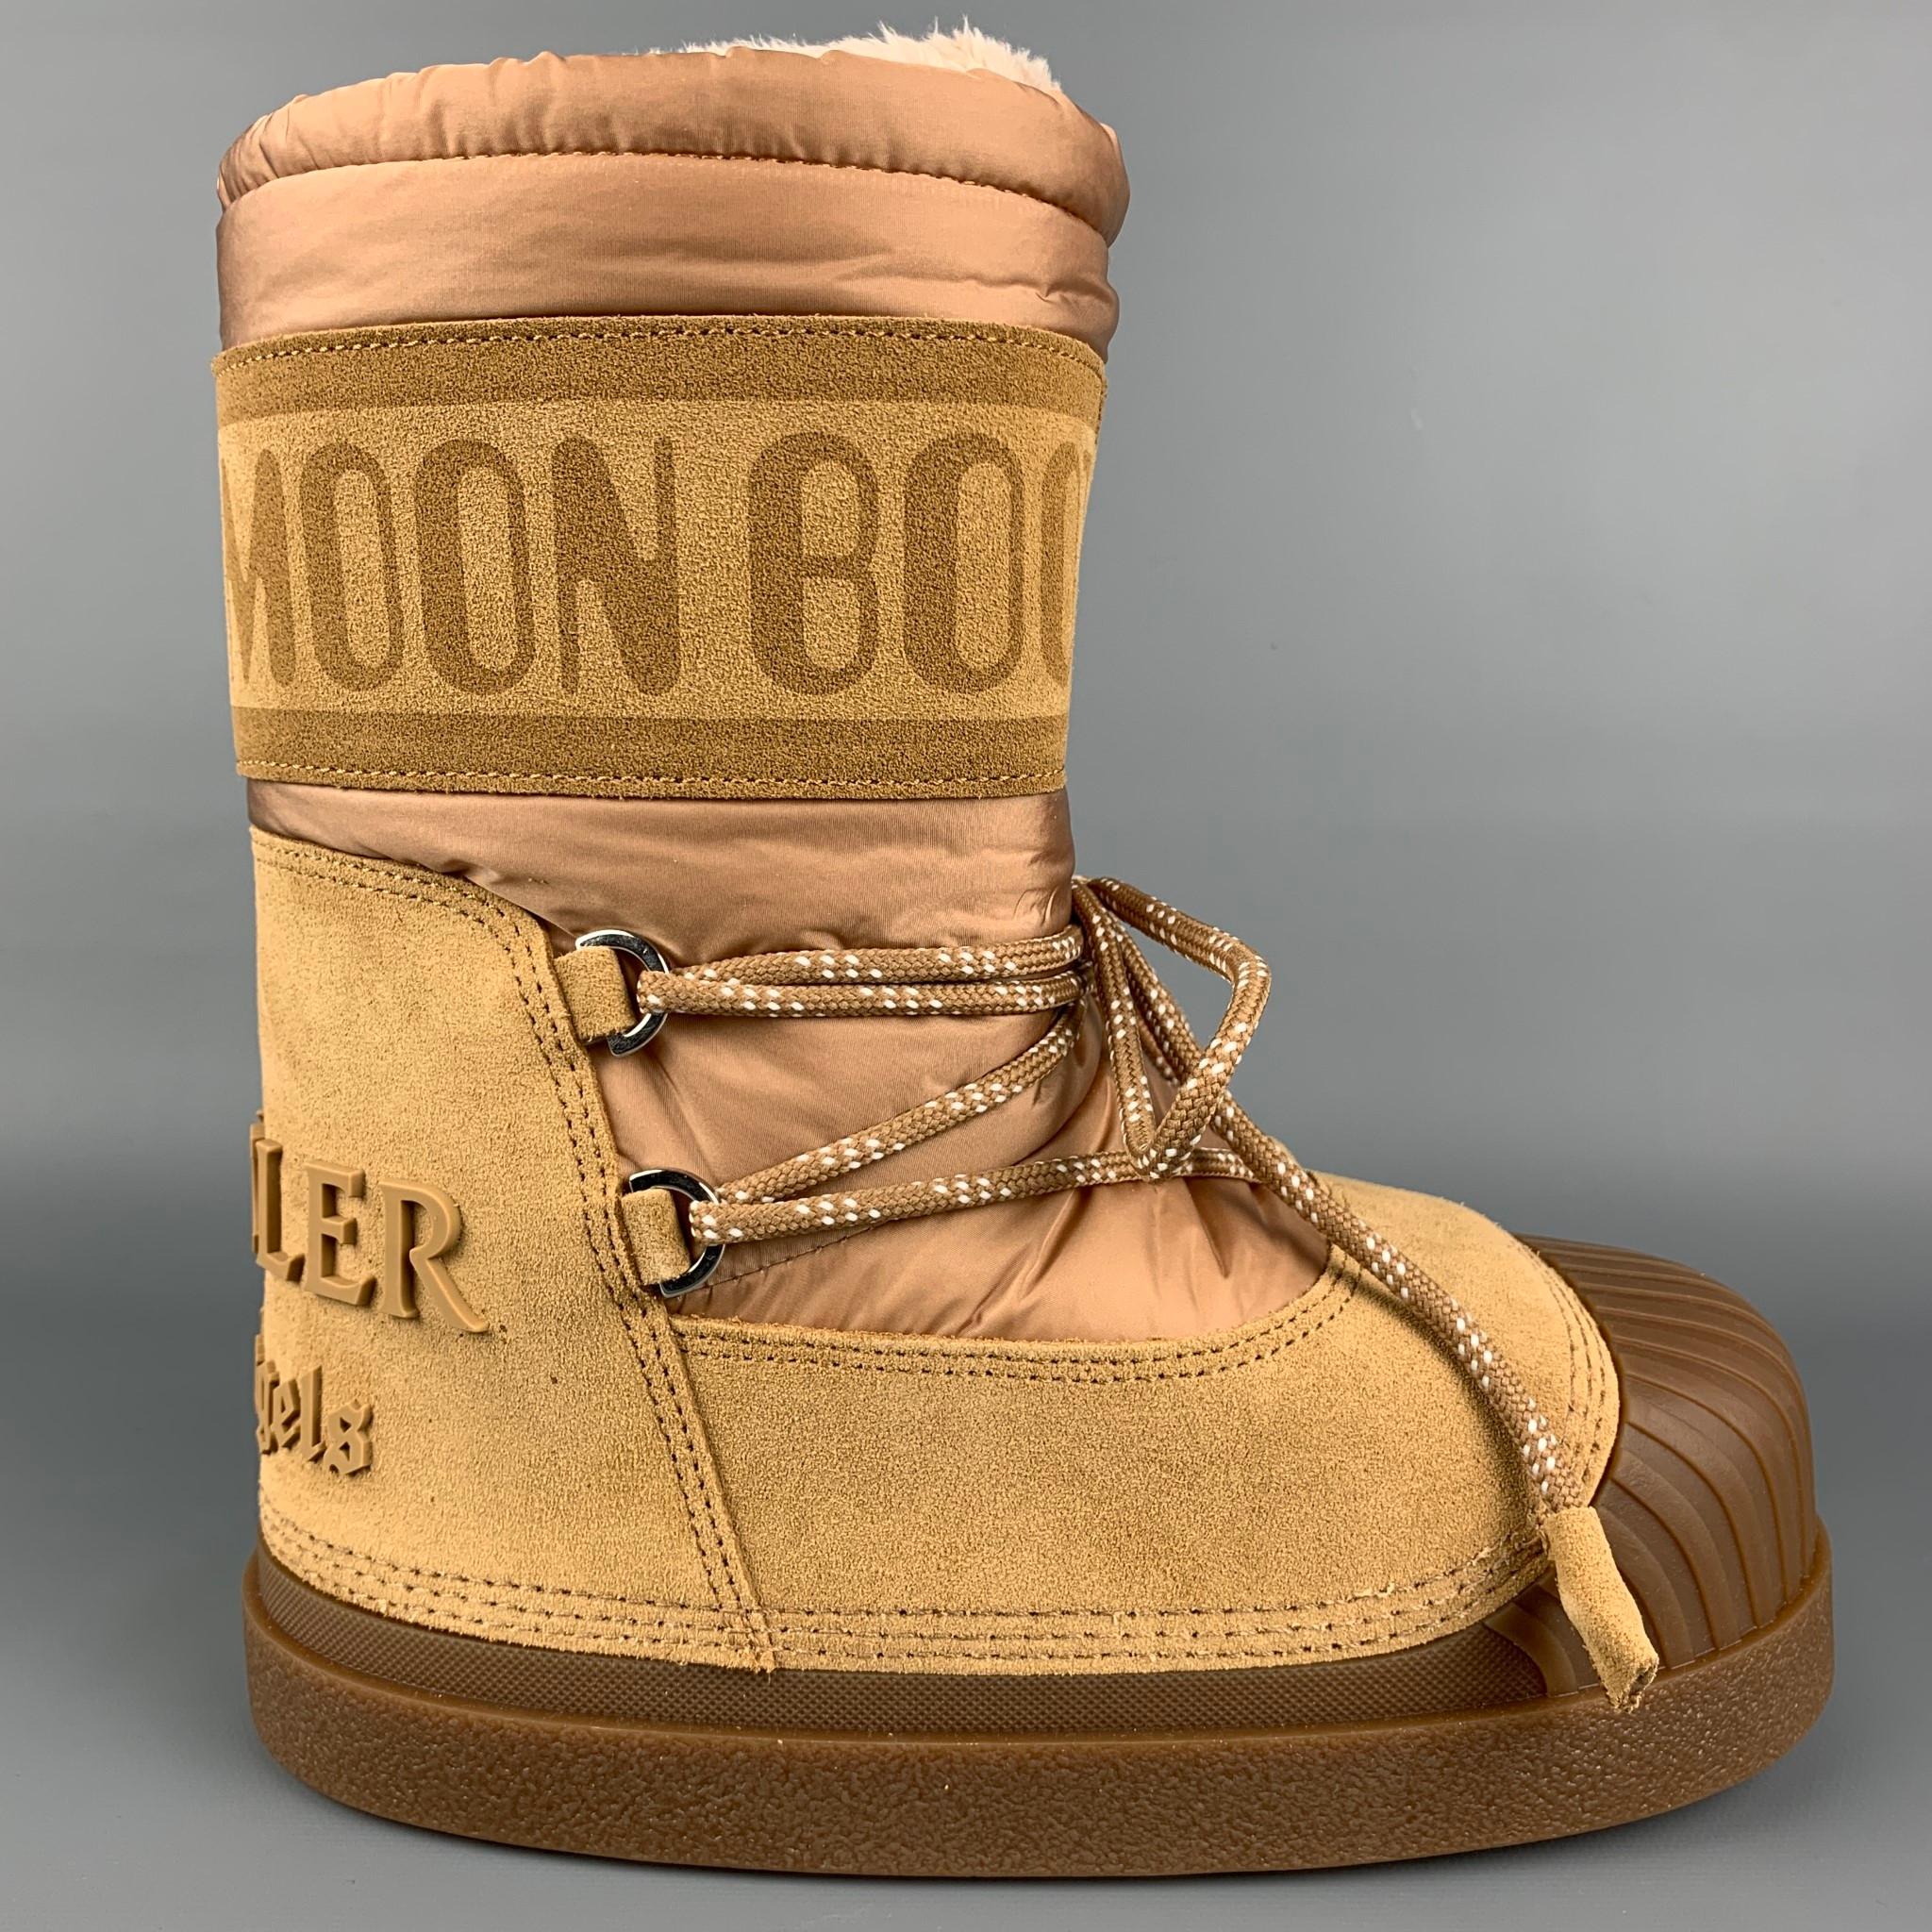 MONCLER GENIUS x Palm Angels 'Moon Boot' comes in a tan suede featuring a tonal lace up, detachable fringe, faux fur lining, bungee-style drawstring, and a rubber sole. 

New With Box. 
Marked: 3,5-4,5
Original Retail Price: